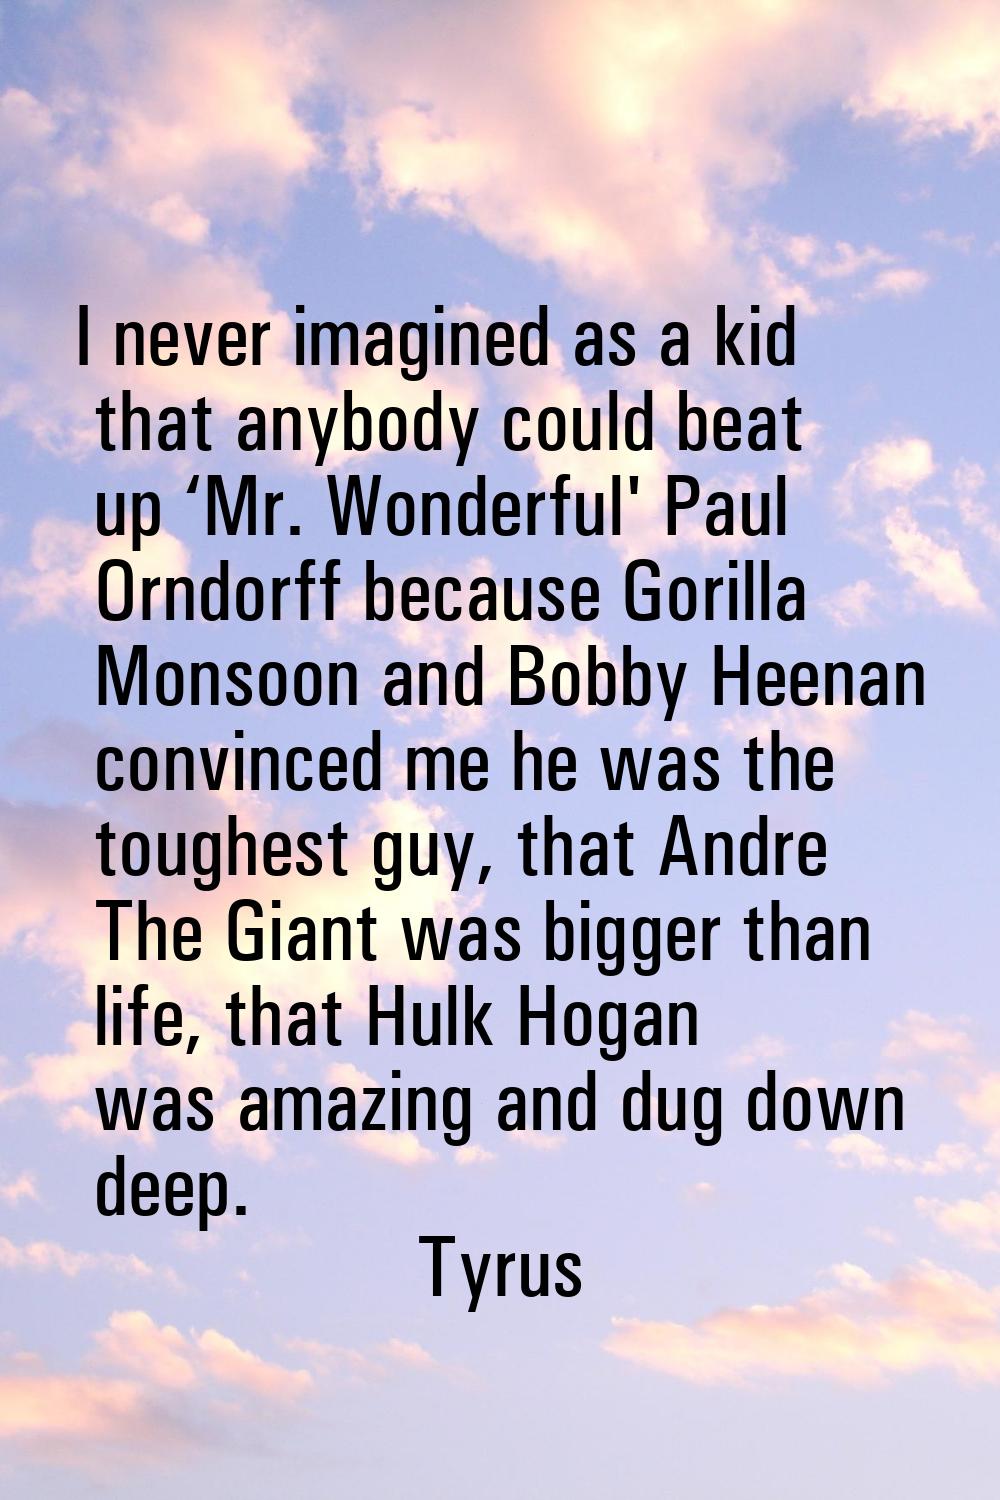 I never imagined as a kid that anybody could beat up ‘Mr. Wonderful' Paul Orndorff because Gorilla 